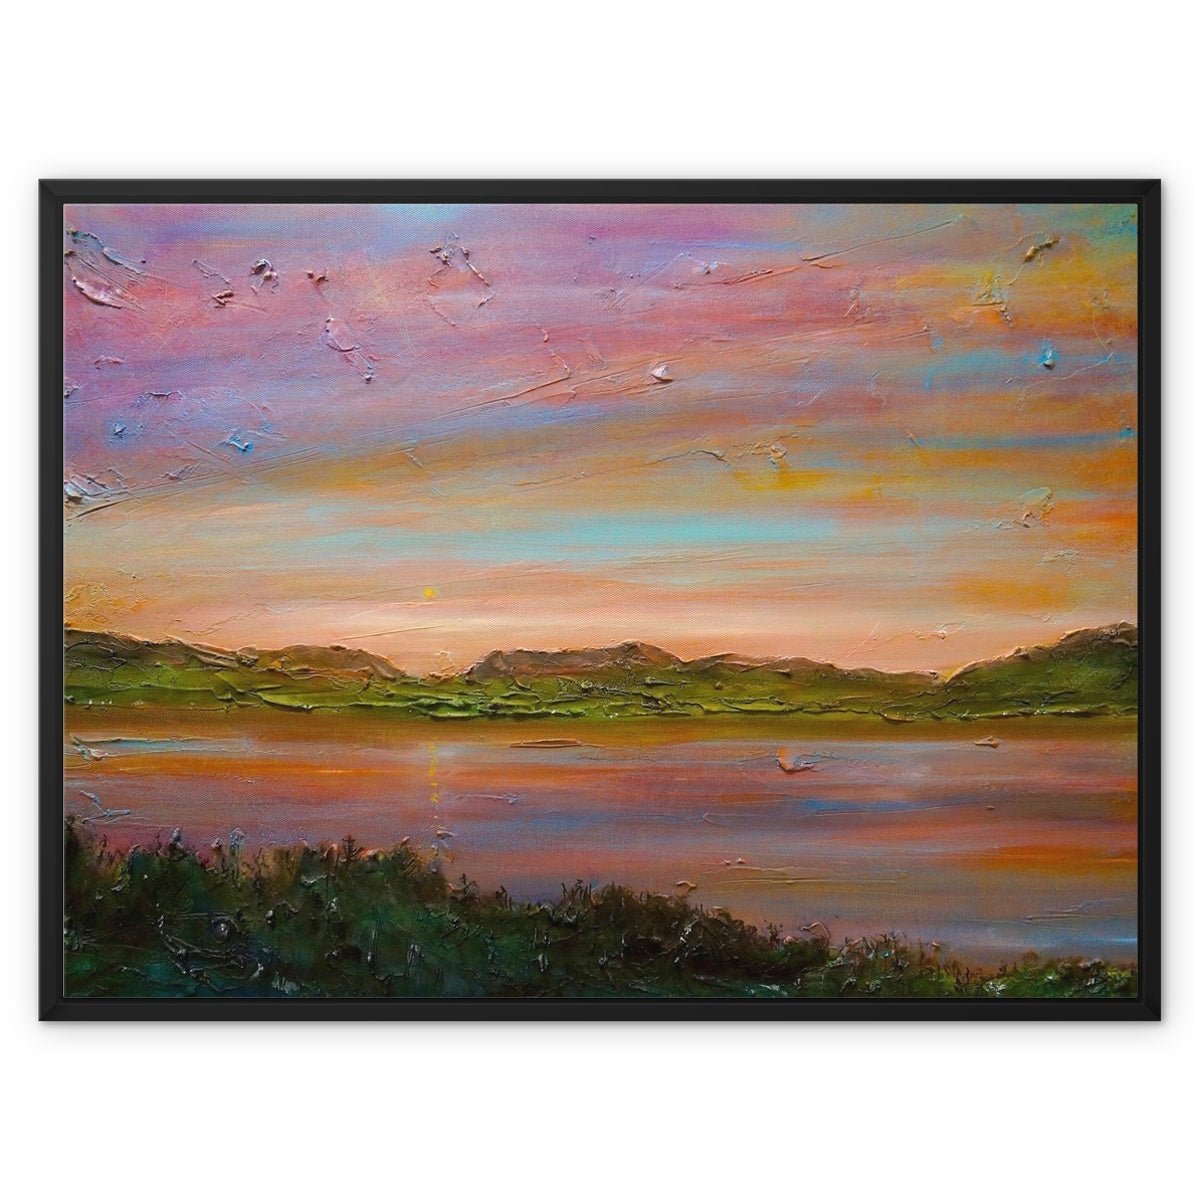 Gourock Golf Club Sunset Painting | Framed Canvas From Scotland-Floating Framed Canvas Prints-River Clyde Art Gallery-32"x24"-Black Frame-Paintings, Prints, Homeware, Art Gifts From Scotland By Scottish Artist Kevin Hunter